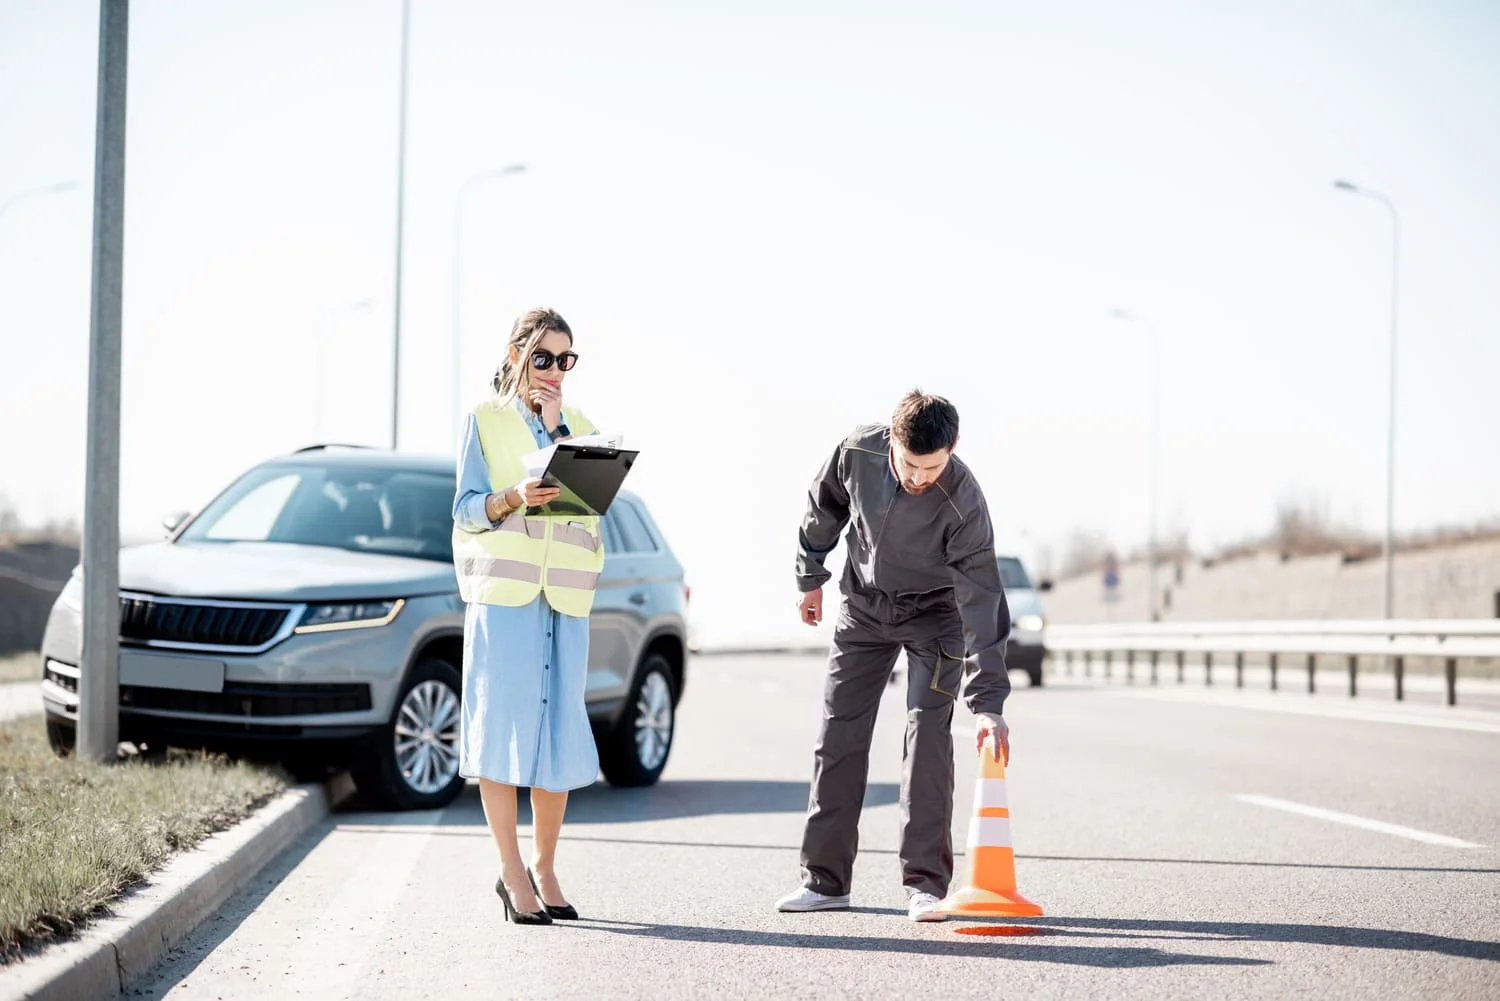 Fort Worth, TX Pedestrian Accident Claims - AMS Law Group